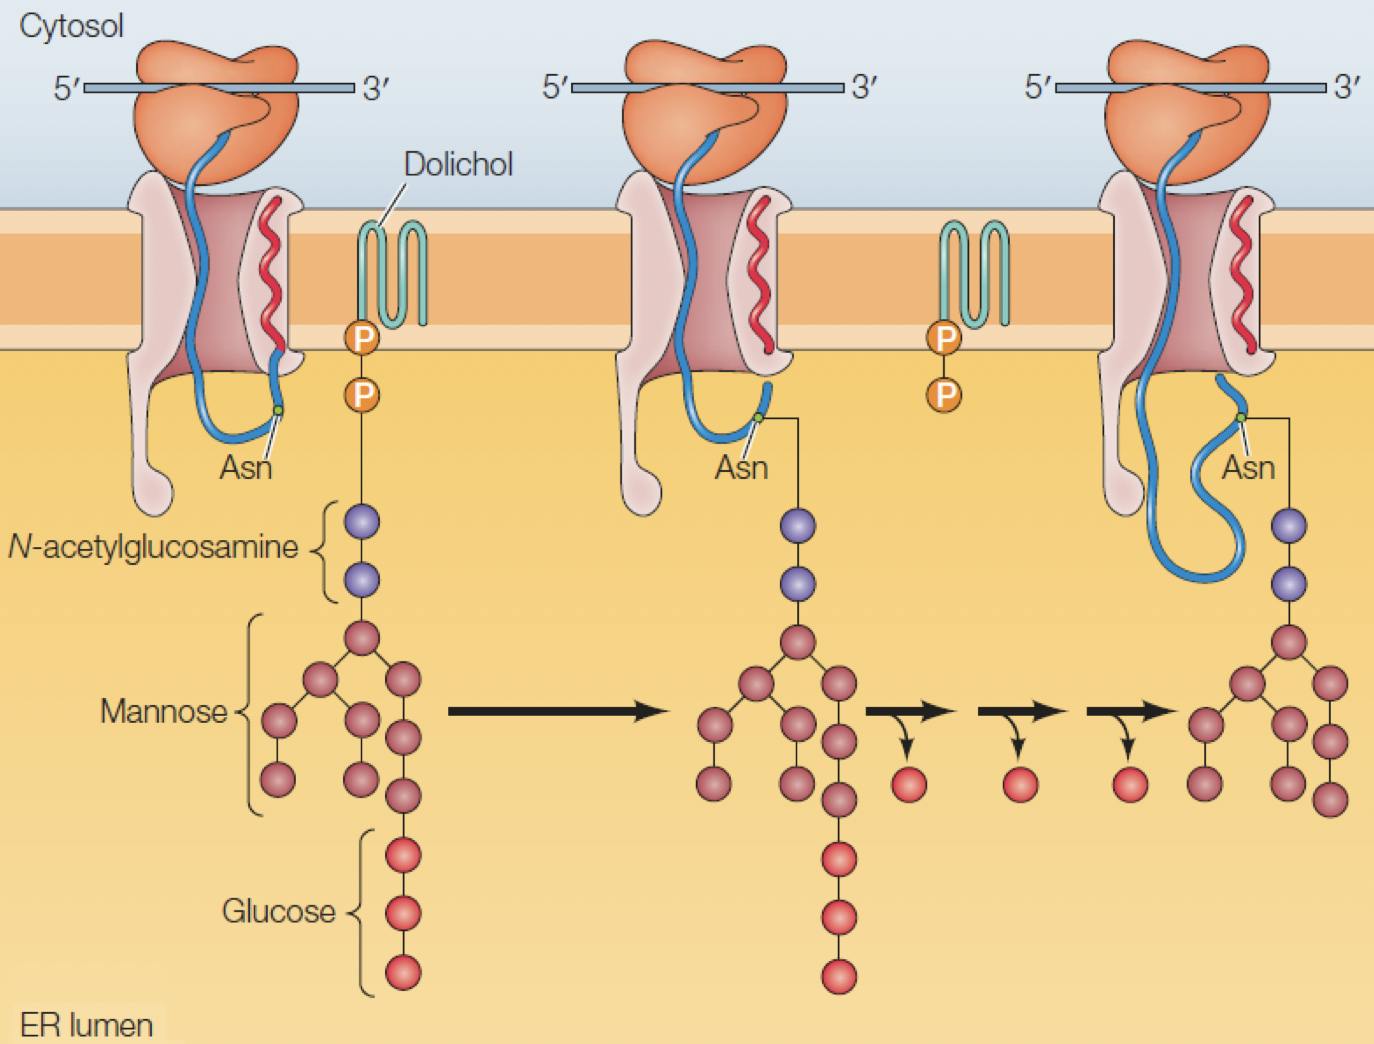 A peptide being translated from mRNA by a ribosome is translocated into the ER